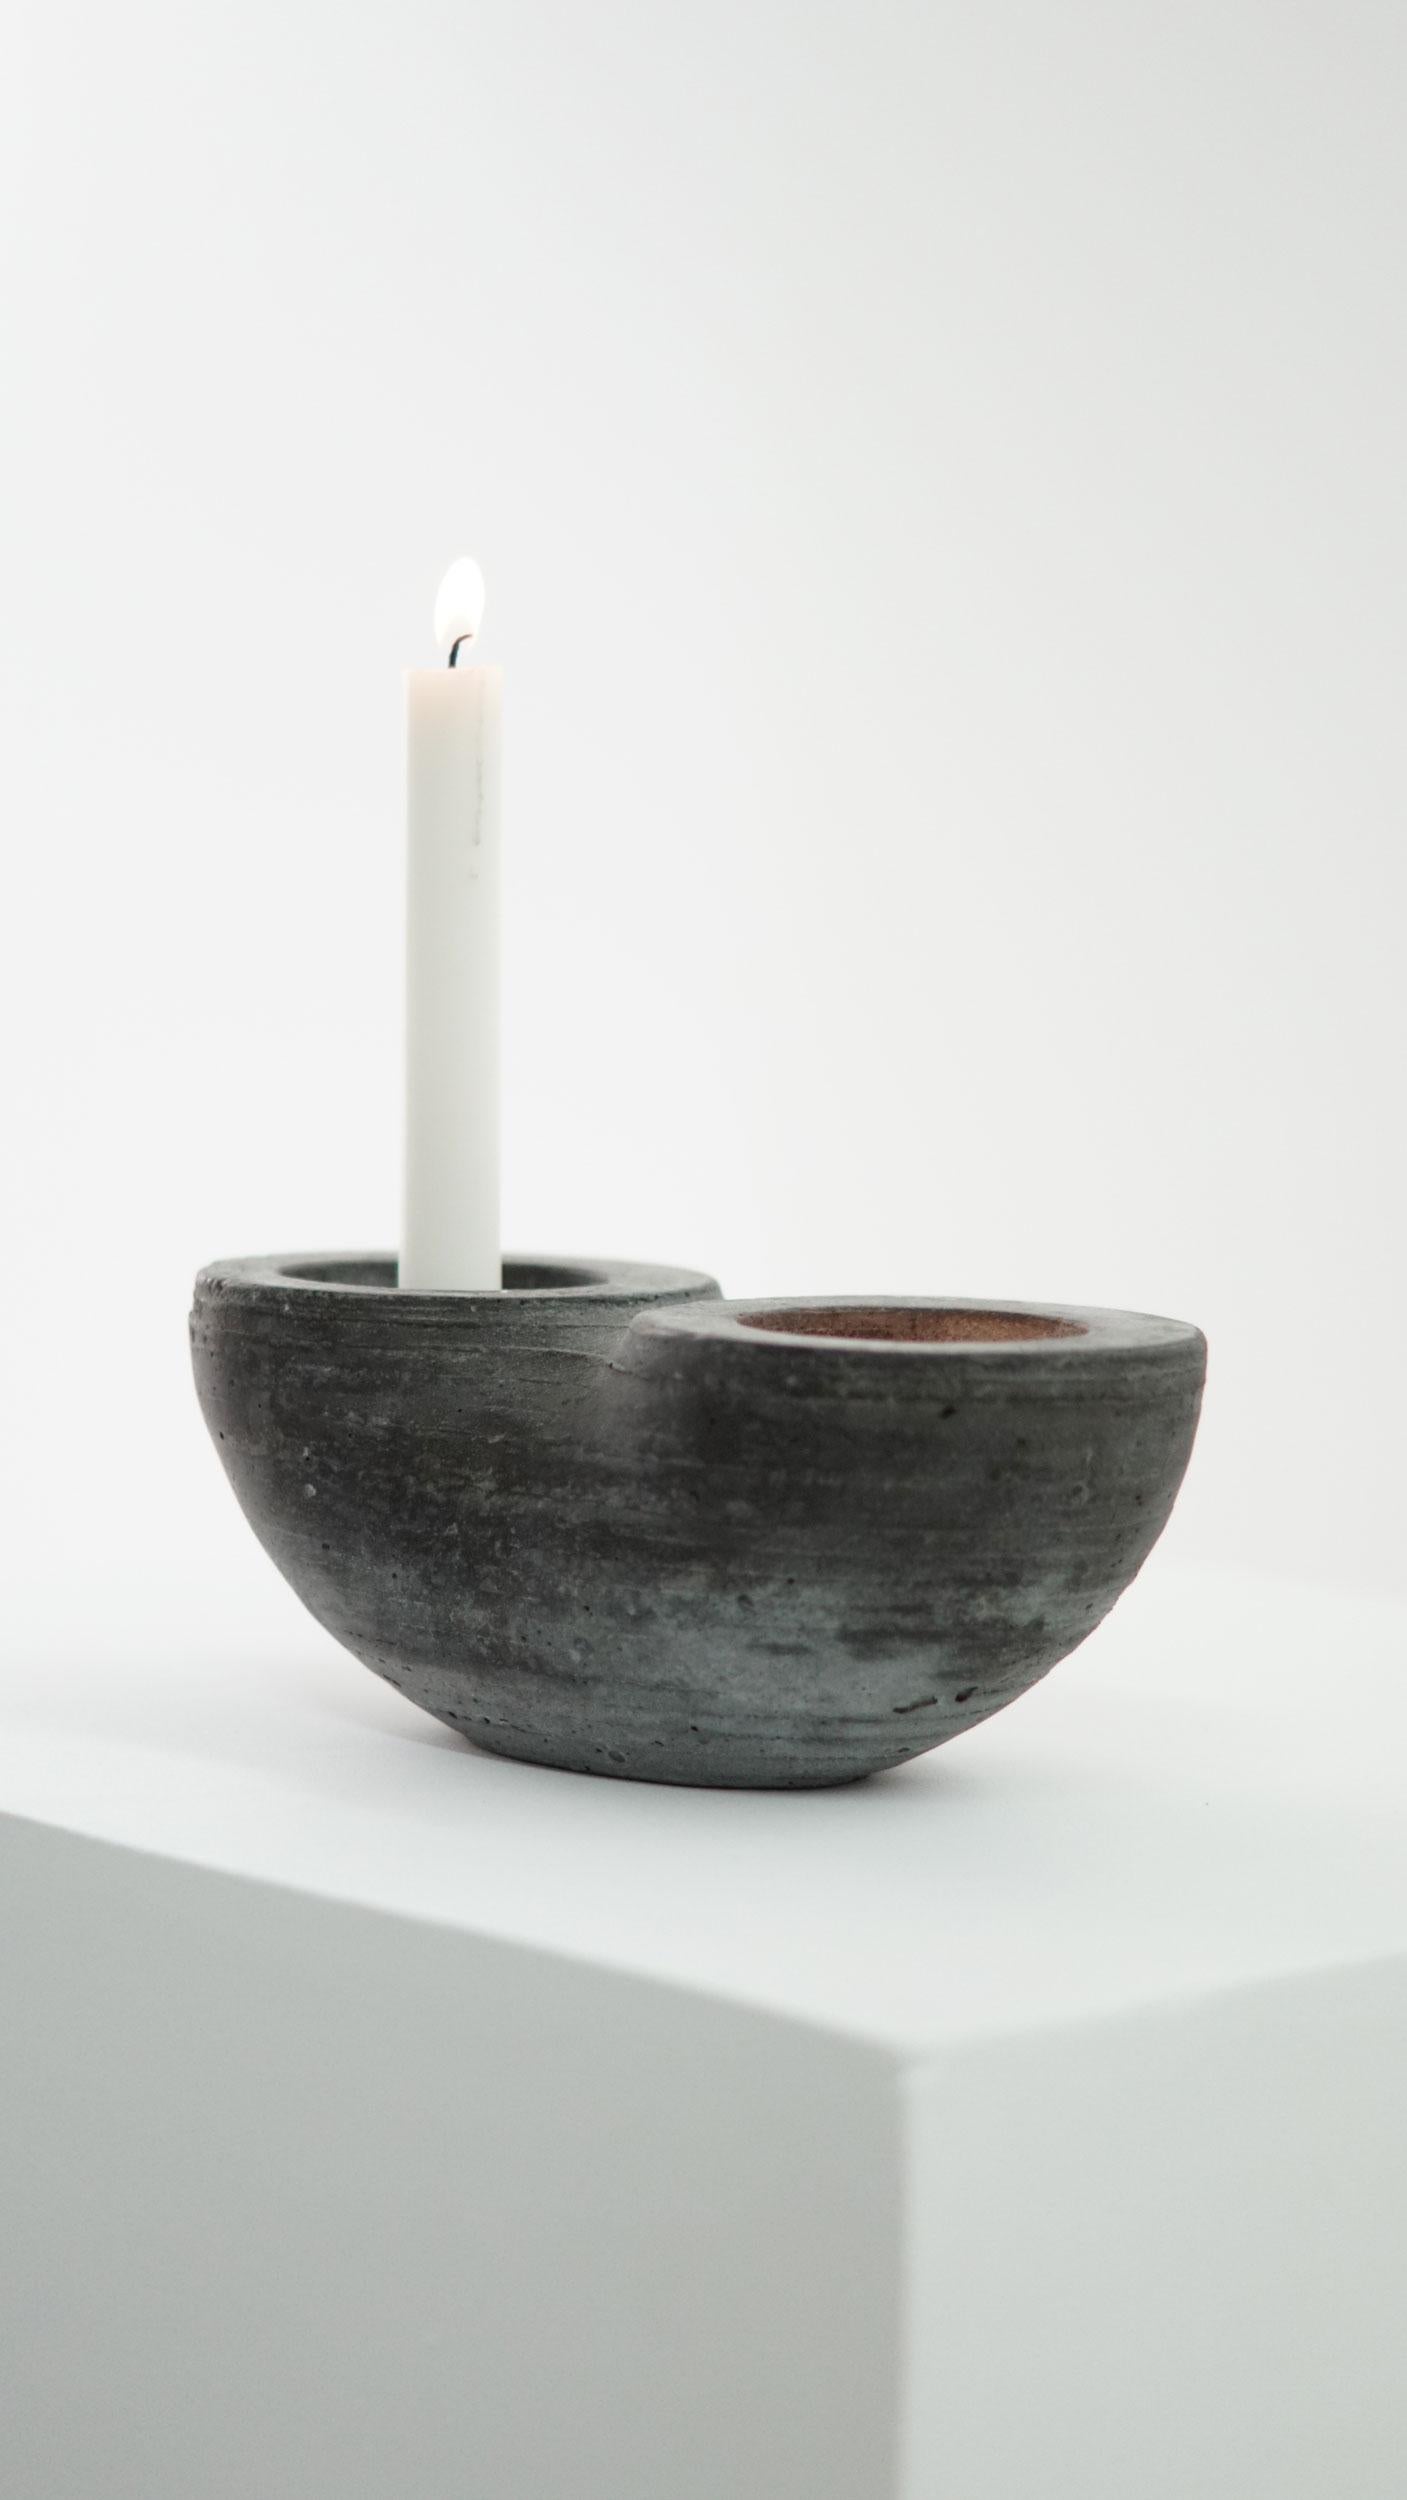 Candle holder for 2 candles.

At the intersection of art, craft, and design, Concrete Poetics' debut collection of hand-cast cement sculptural furniture and accessories streamlines visually intriguing and dynamic forms juxtaposing the density of the